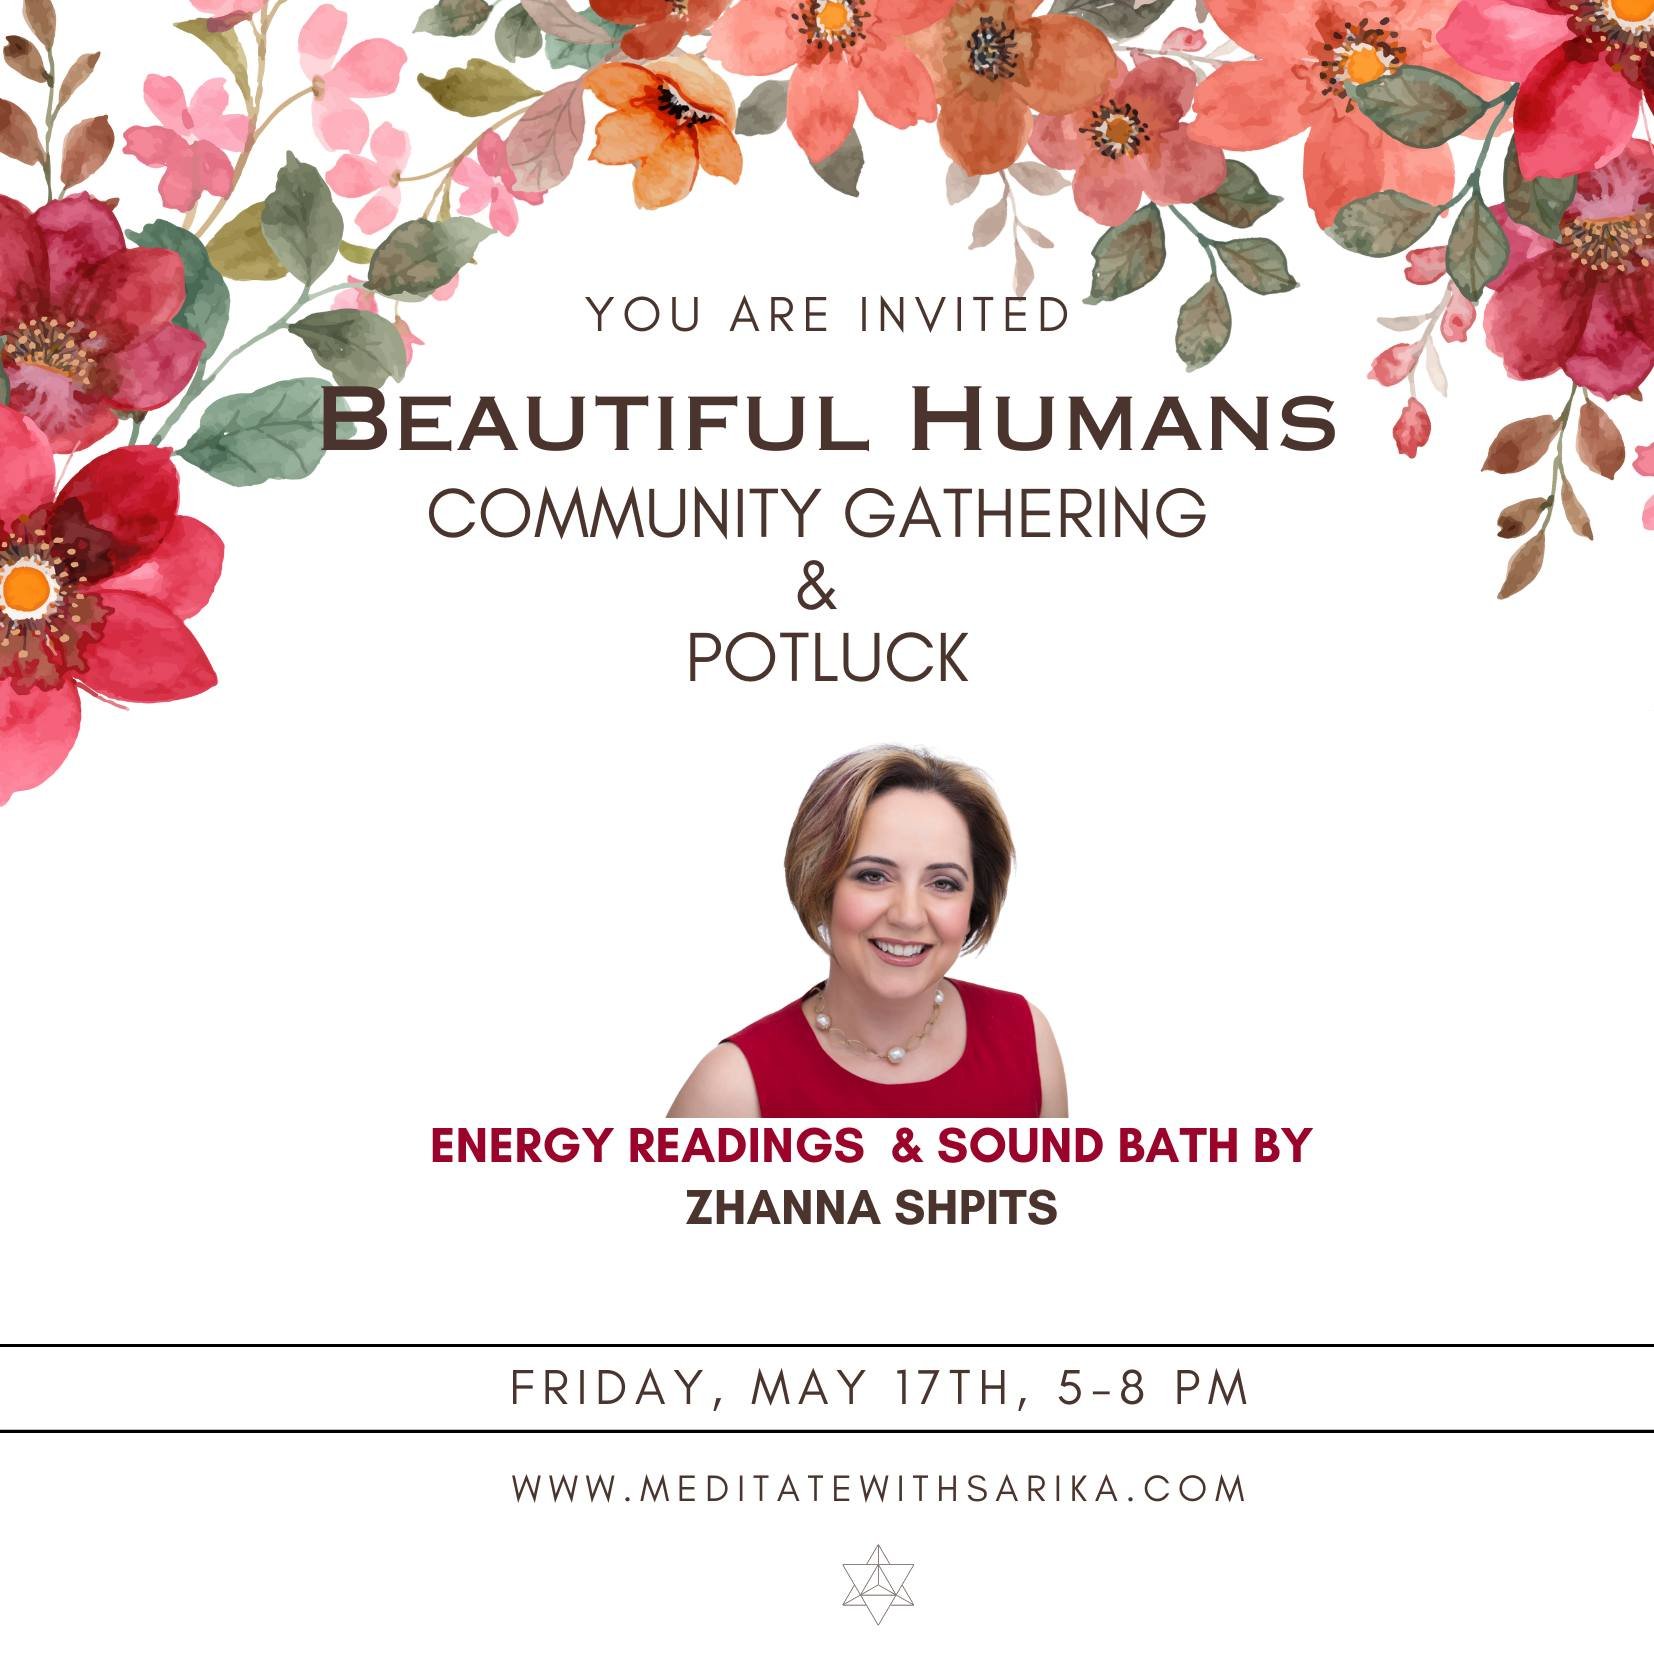 Join our upcoming community potluck and satsang in Milpitas, California. DM for address! 

🌟Program: An Enchanted Evening with our guest speaker, Zhanna, Founder of Humming Bird Academy where impossible becomes possible!

5:00 Arrive - meet and gree